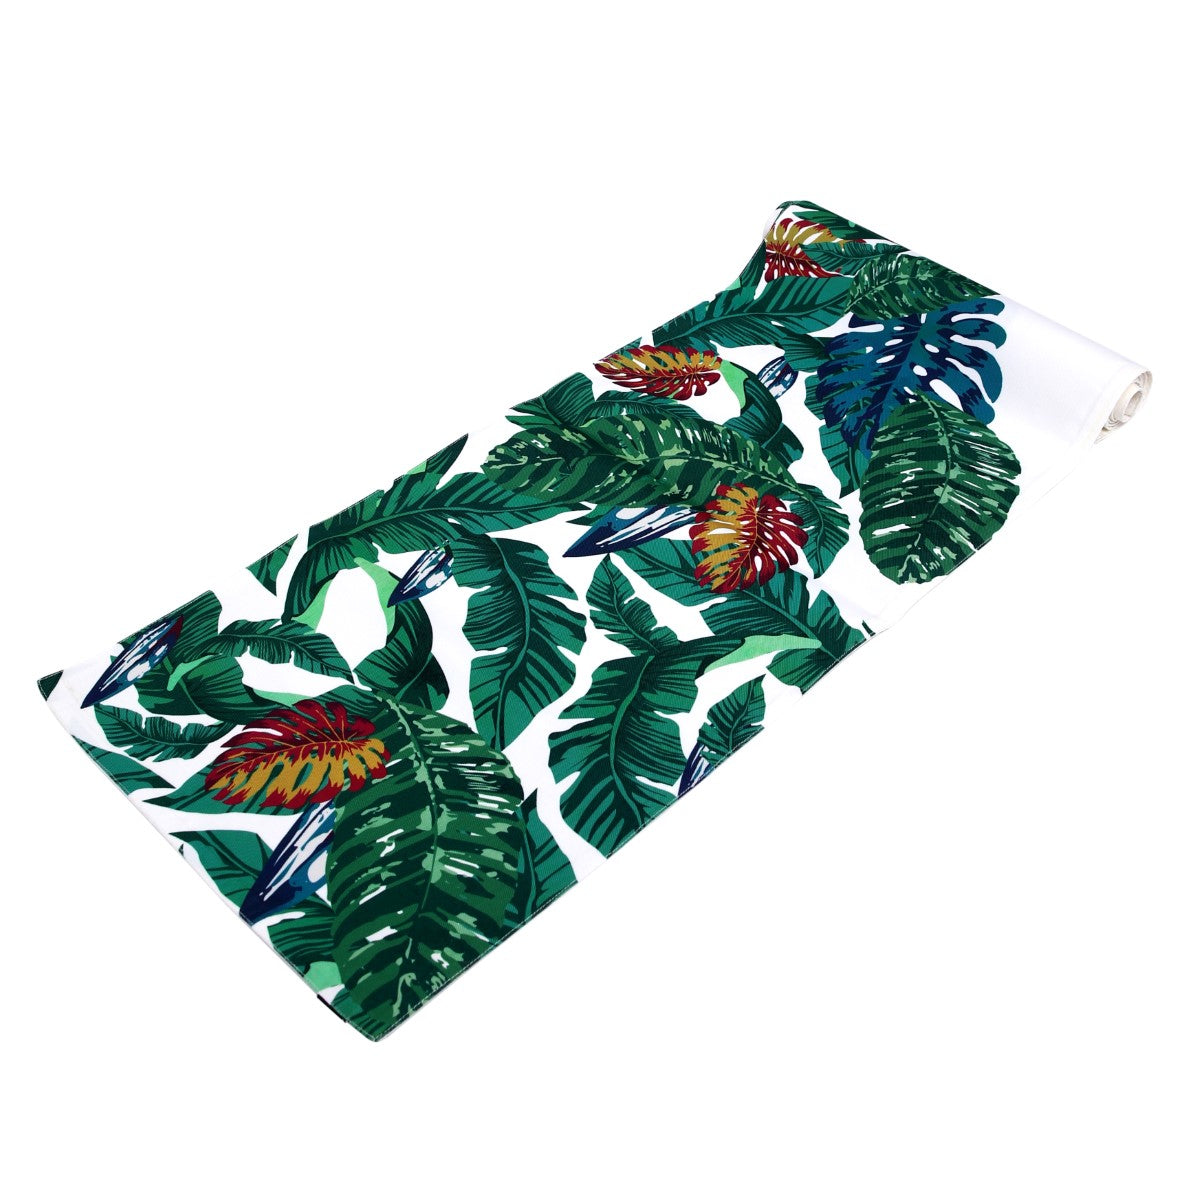 TROPICAL FLORAL RUNNER 14X45